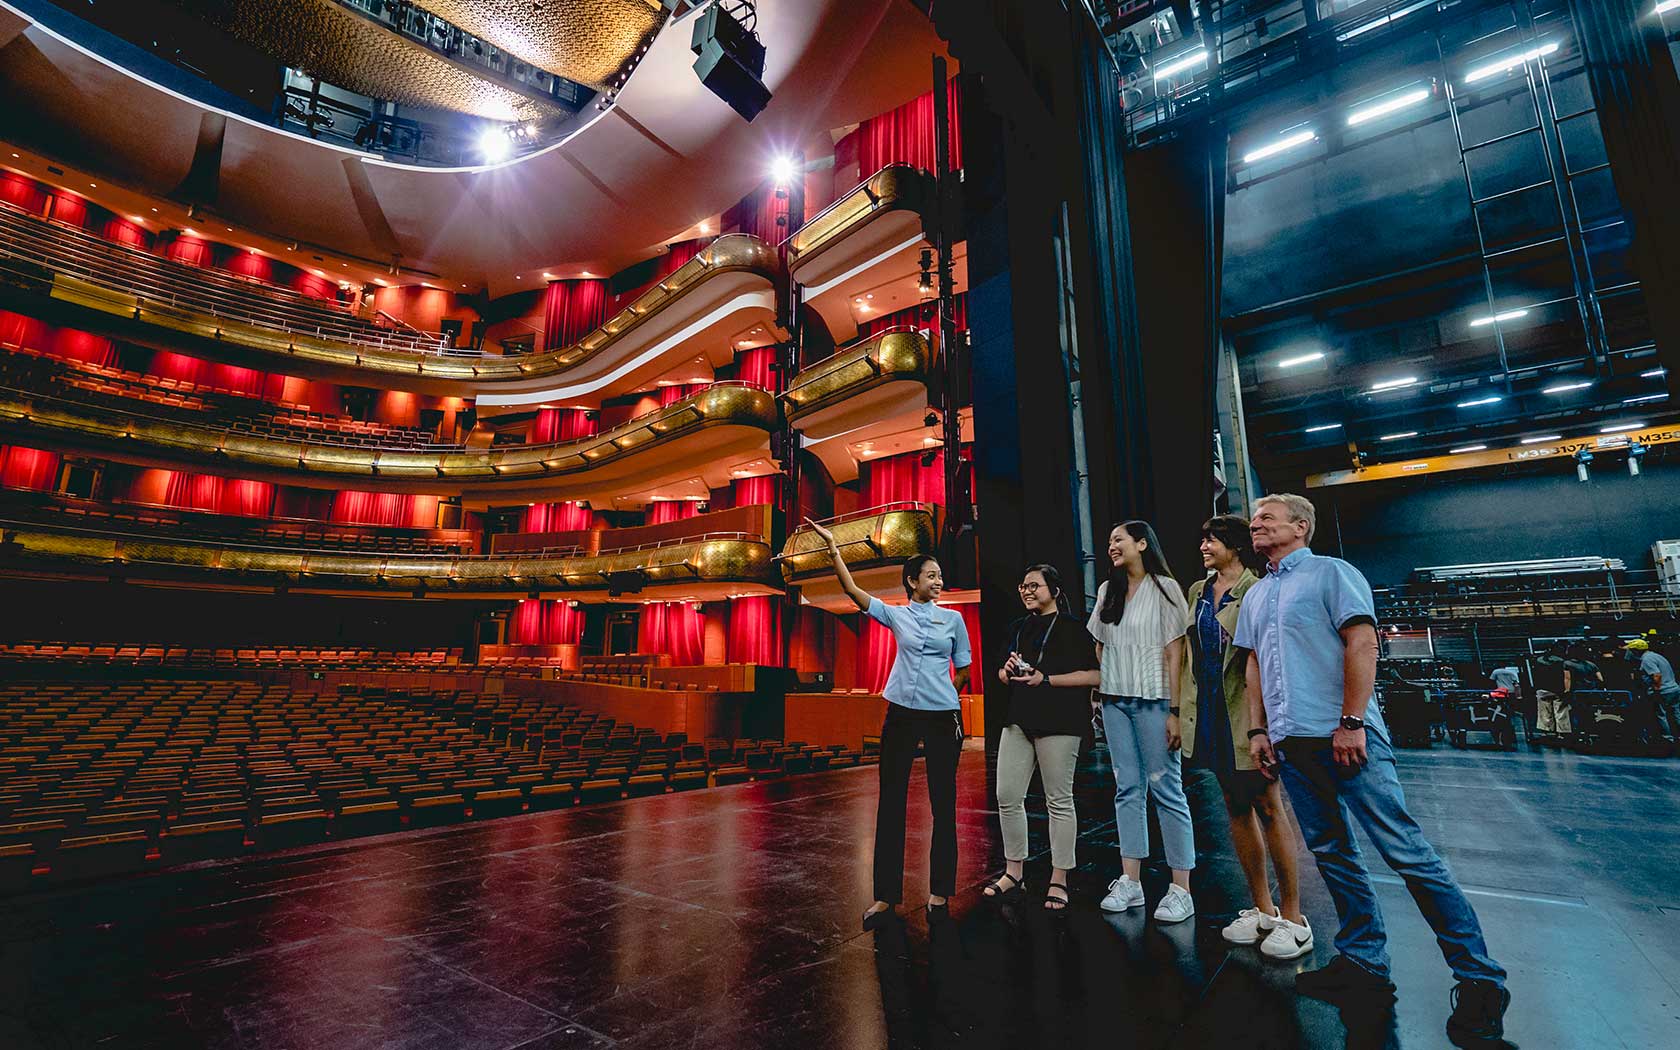 Image of participants on the Esplanade Theatre stage during a guided tour